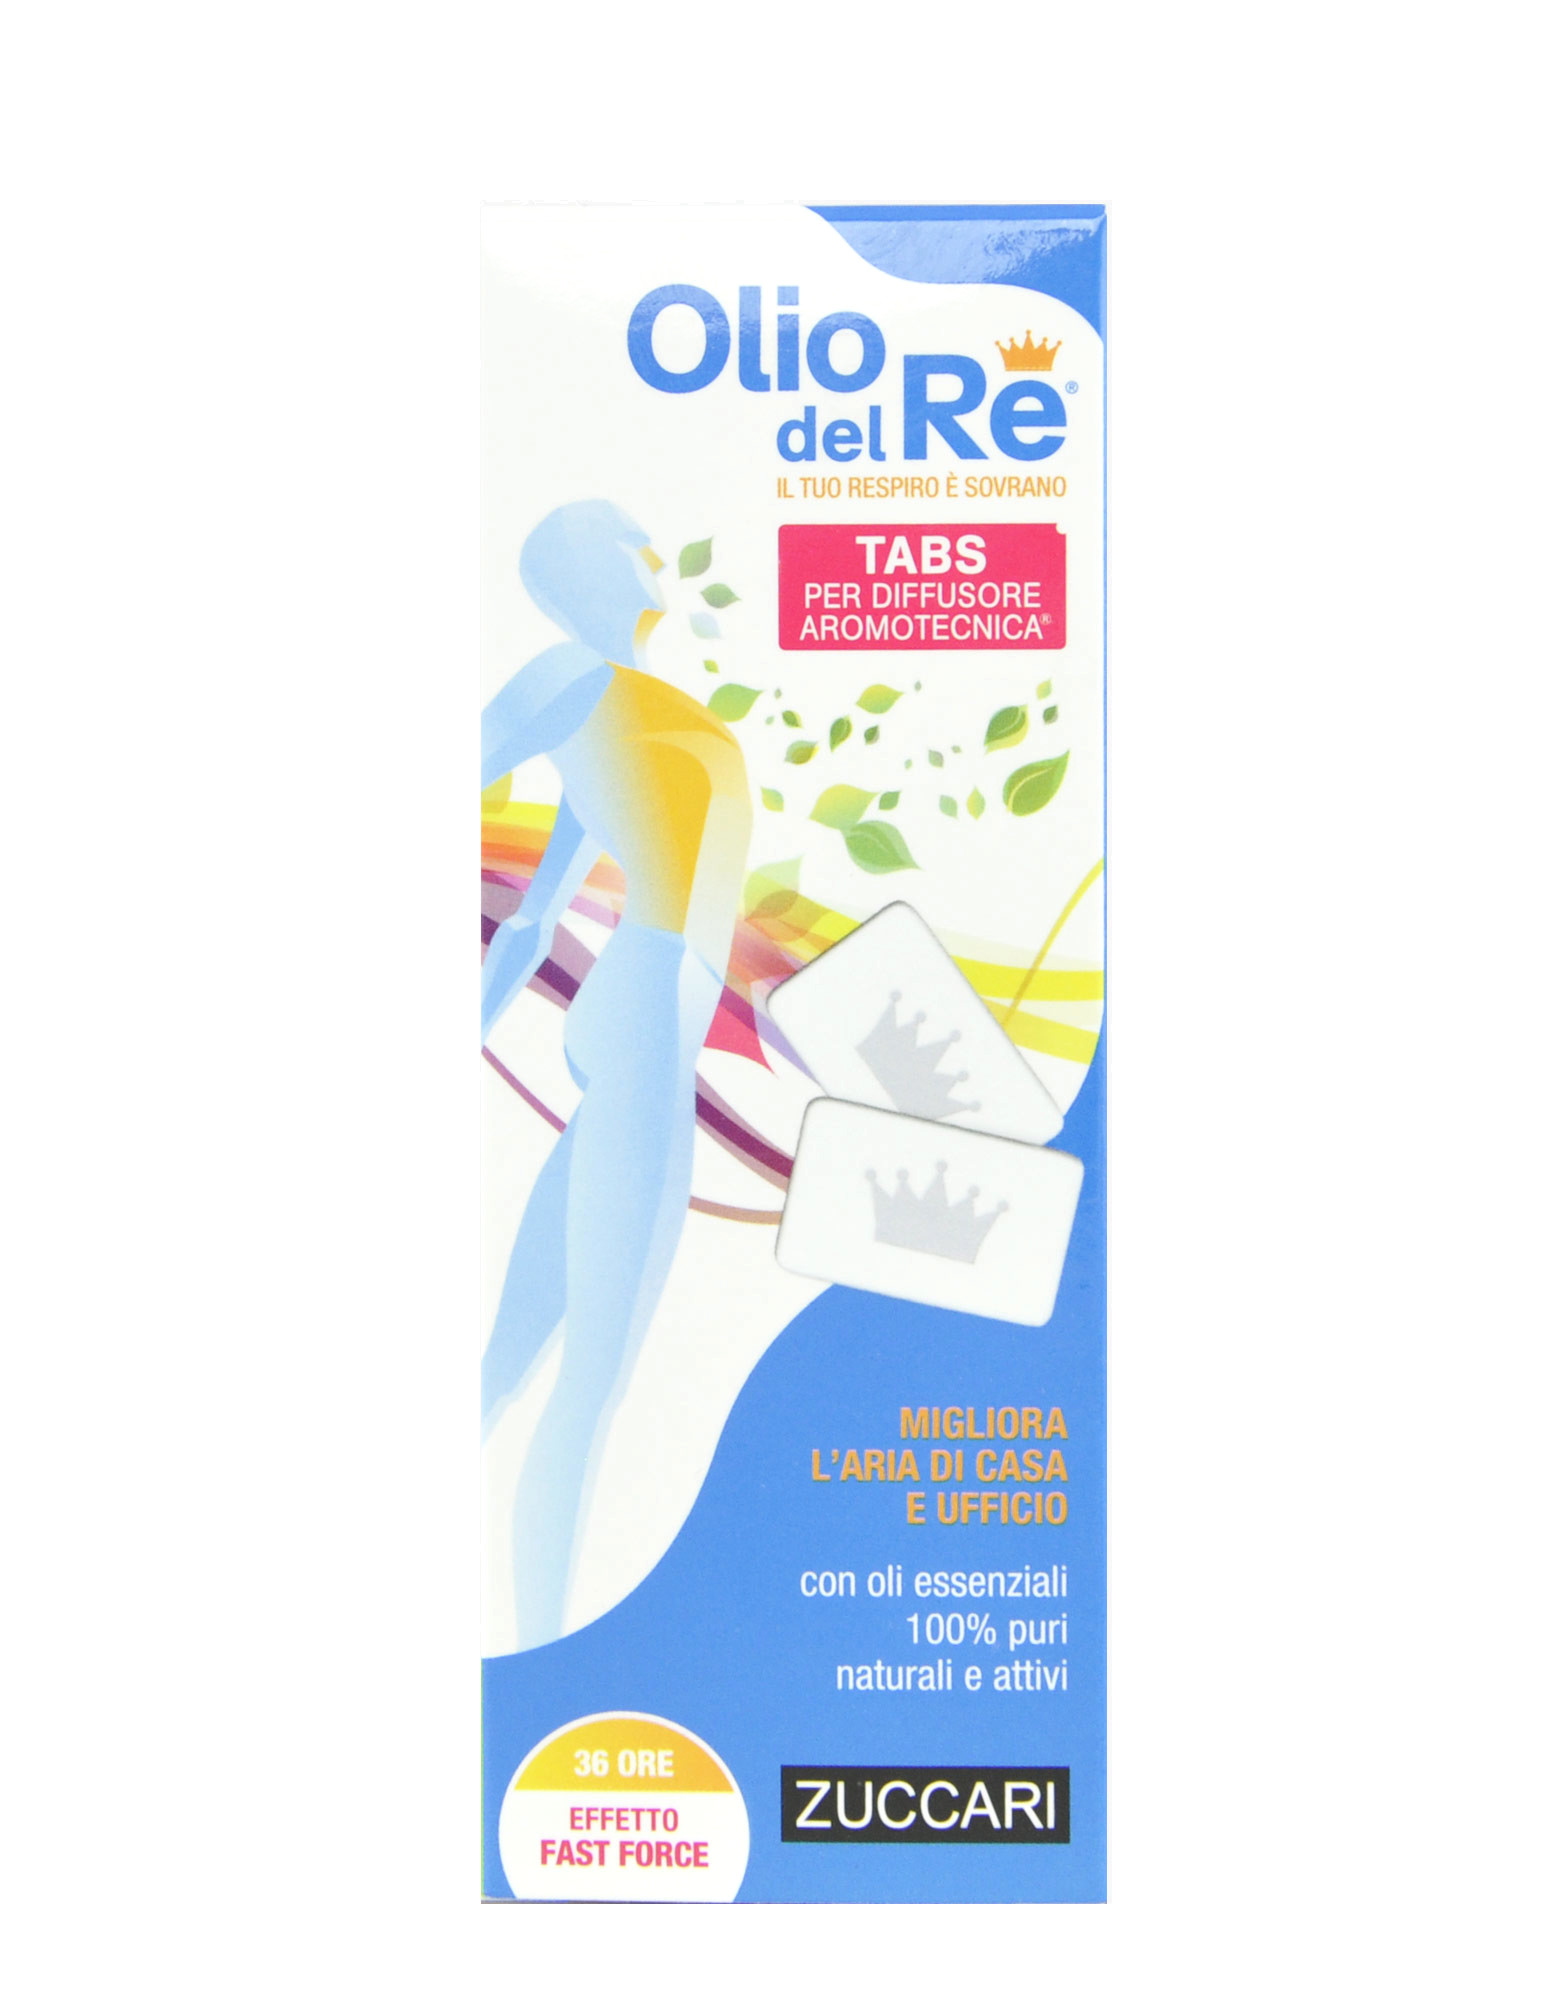 Olio del Re - Tabs for Aromotecnica Diffuser by Zuccari, 9 tabs of 1